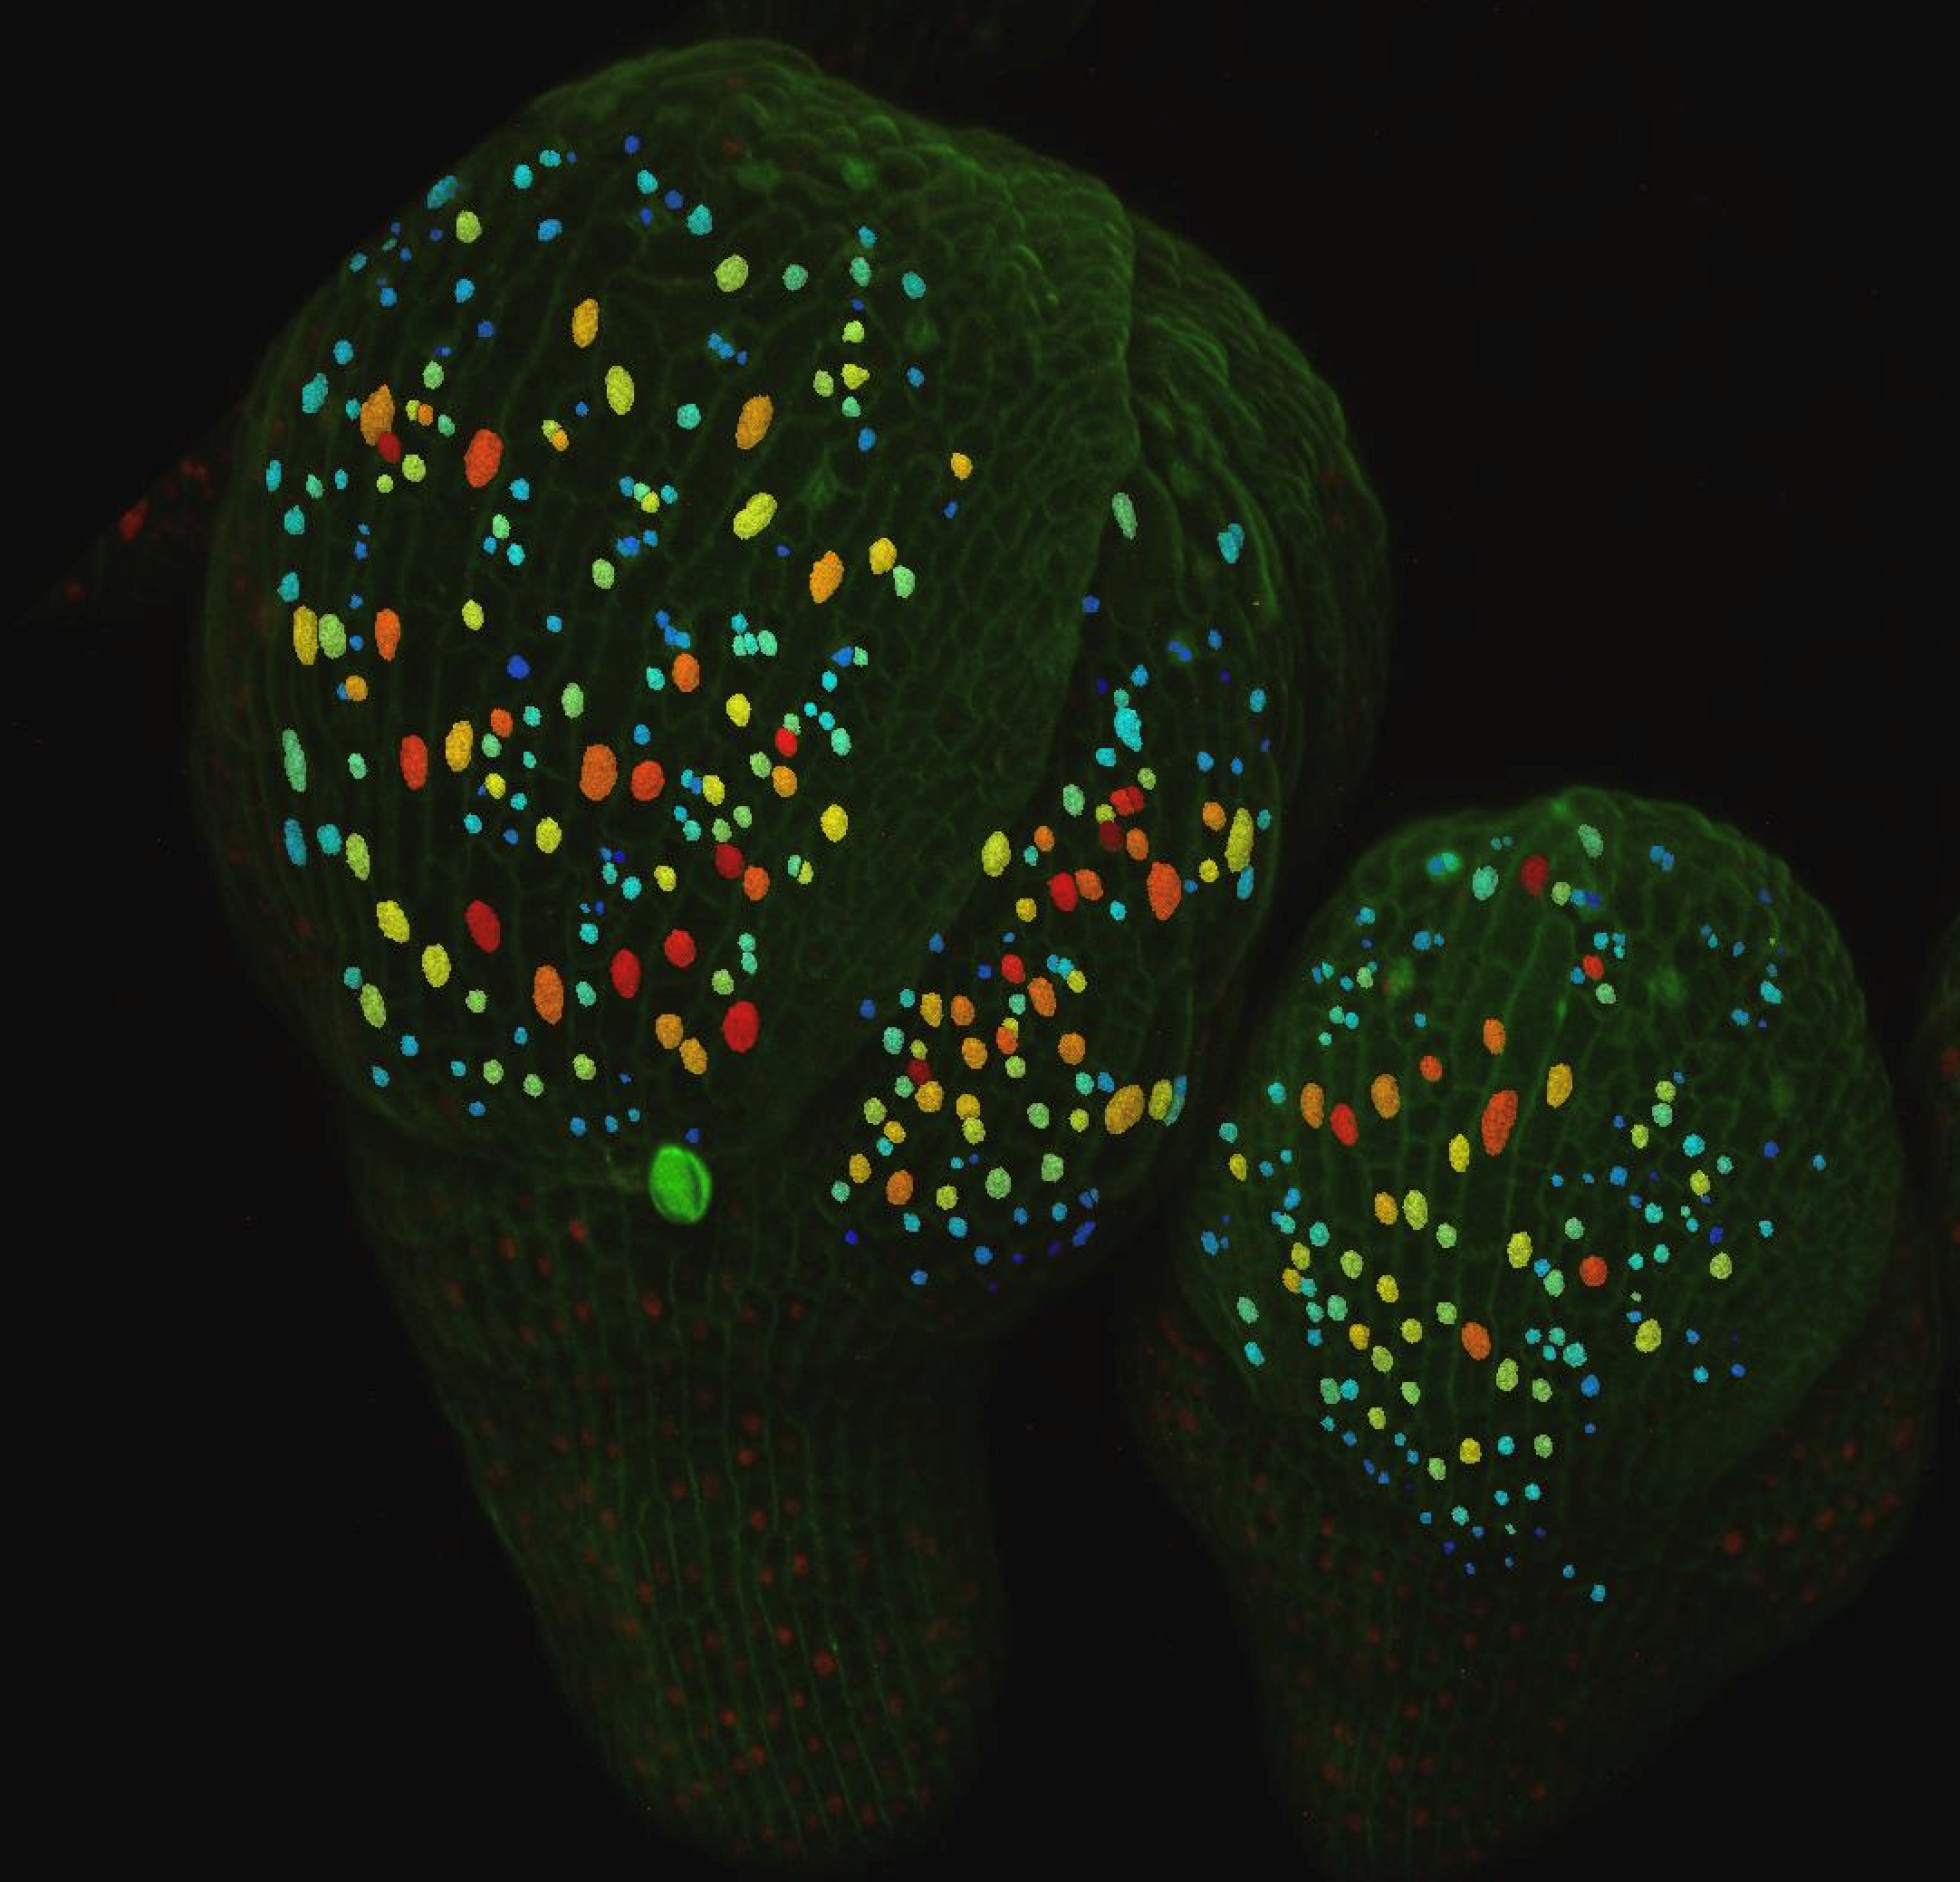 How to become a giant cell? Fluctuations in a key regulator guide cell size in flower organs. 